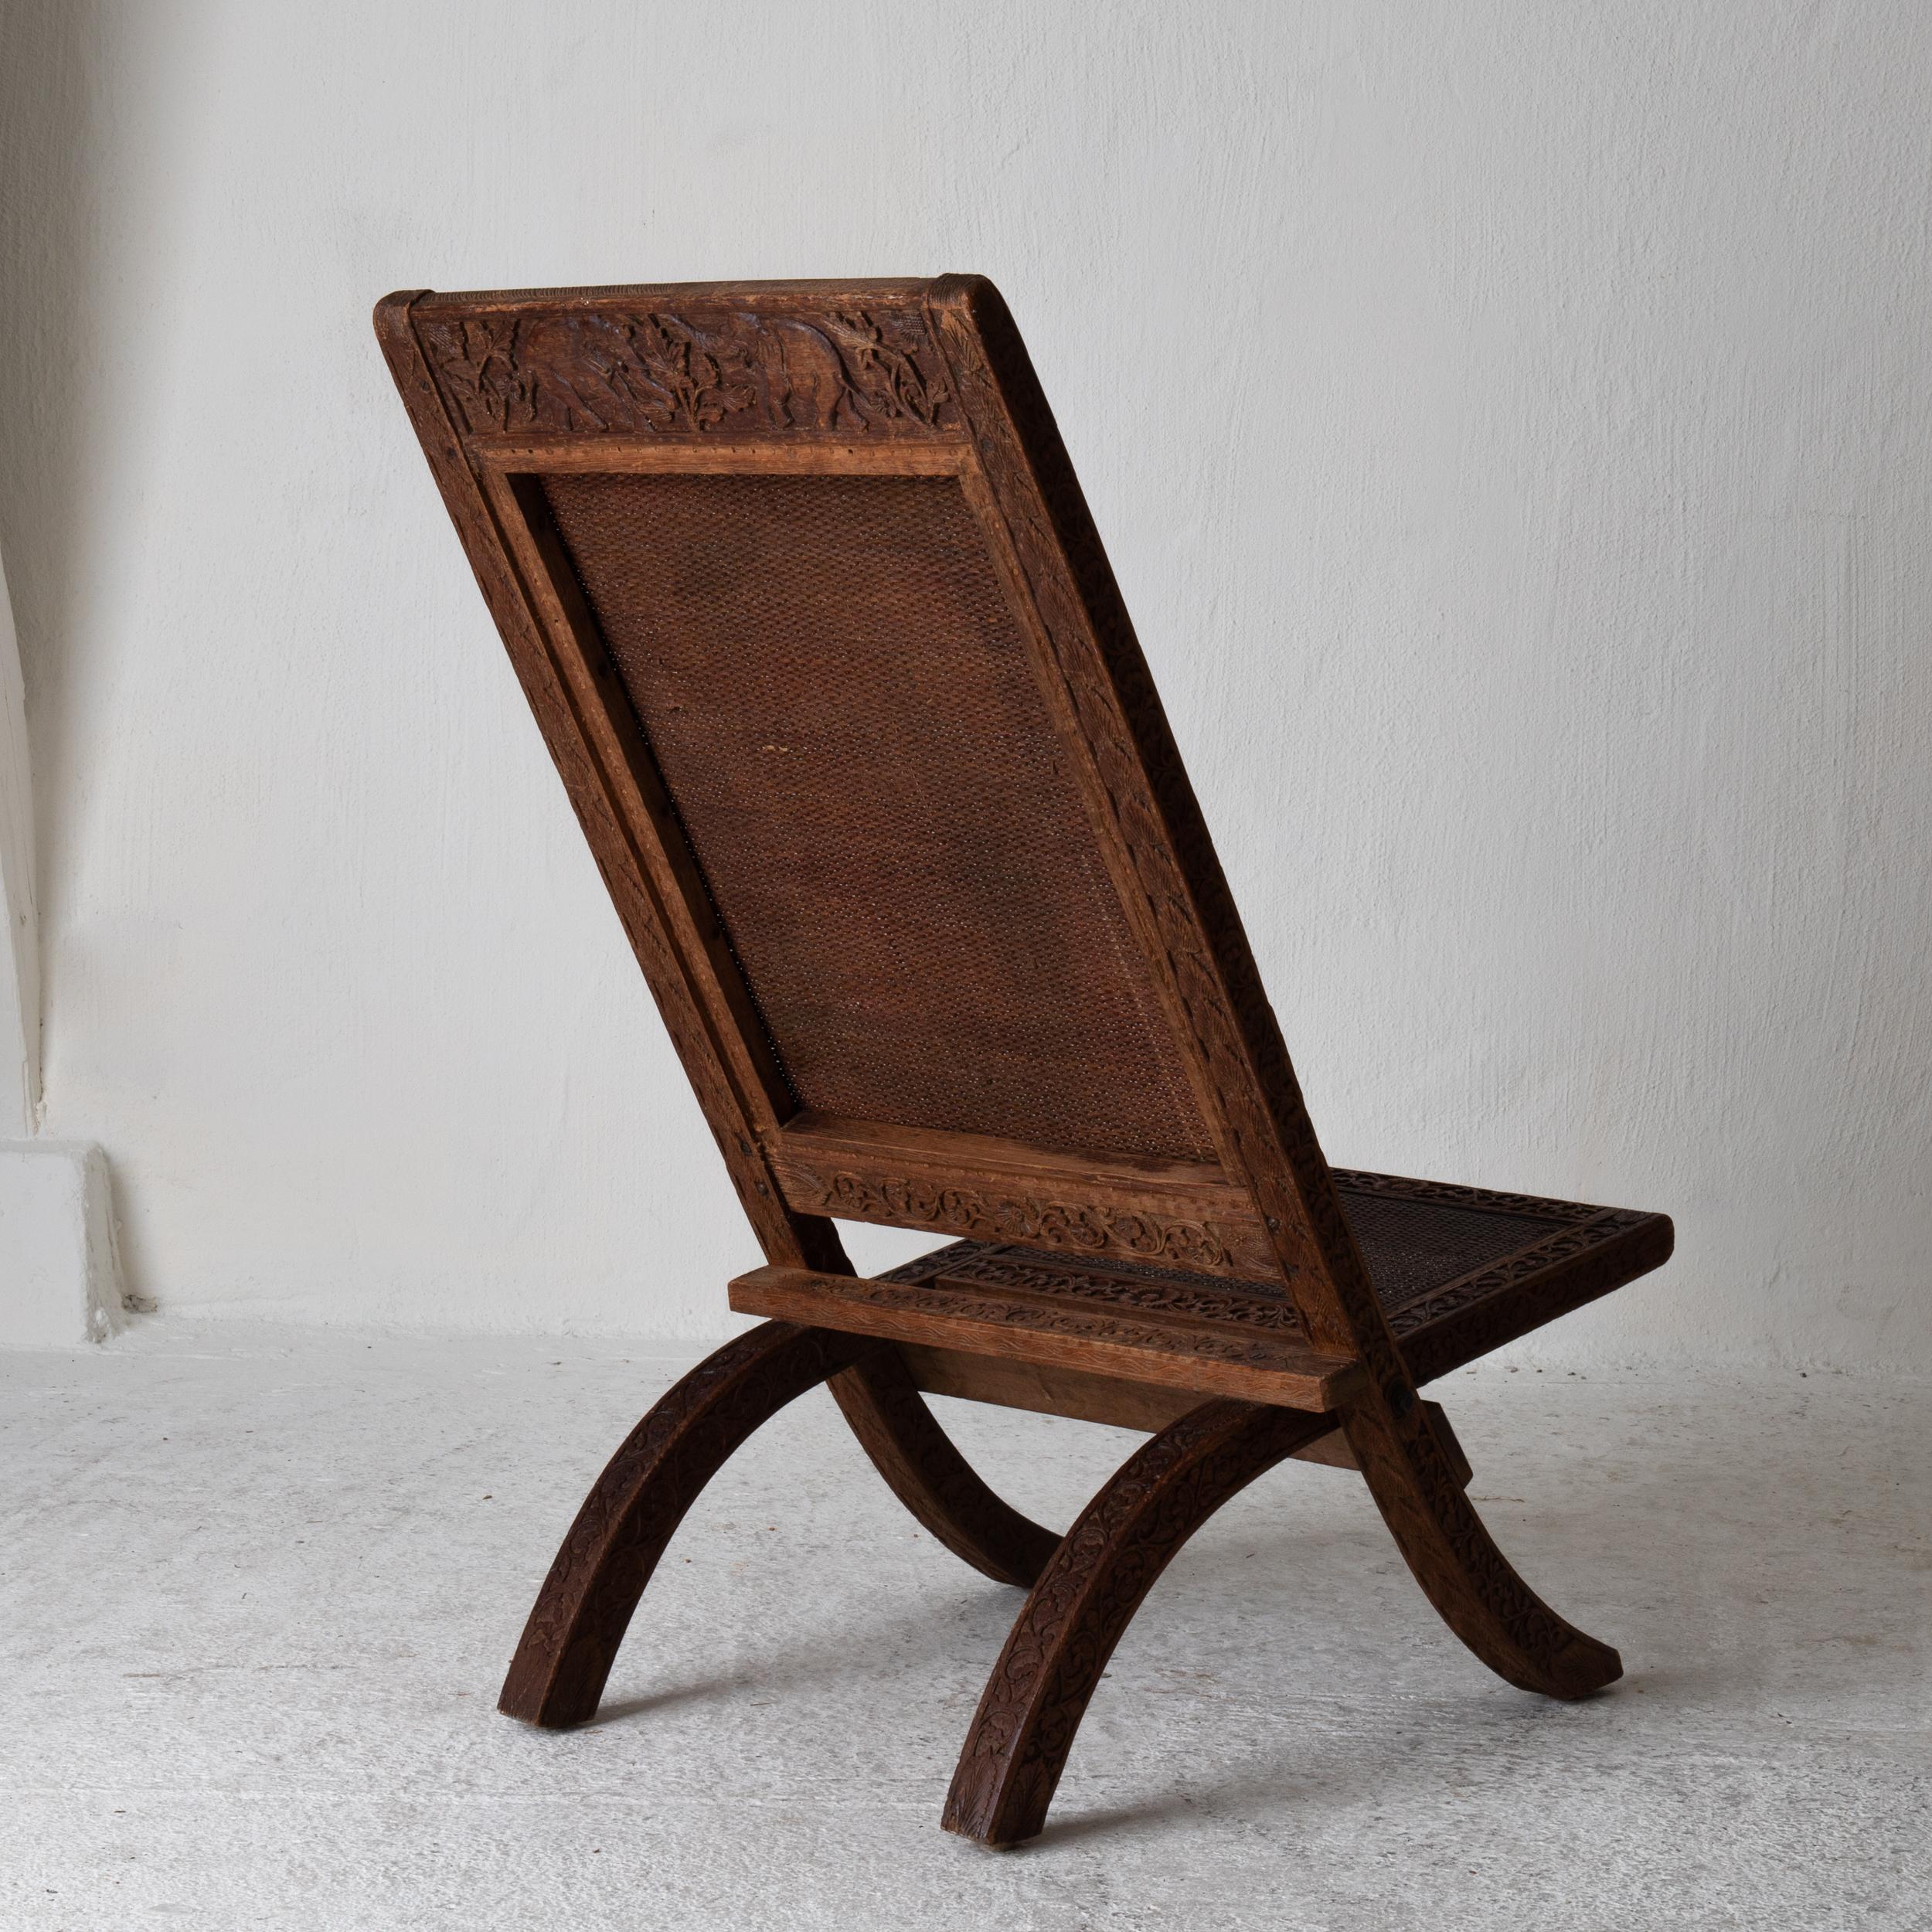 Chair Foldable India Brown Carved, 20th Century, India For Sale 3